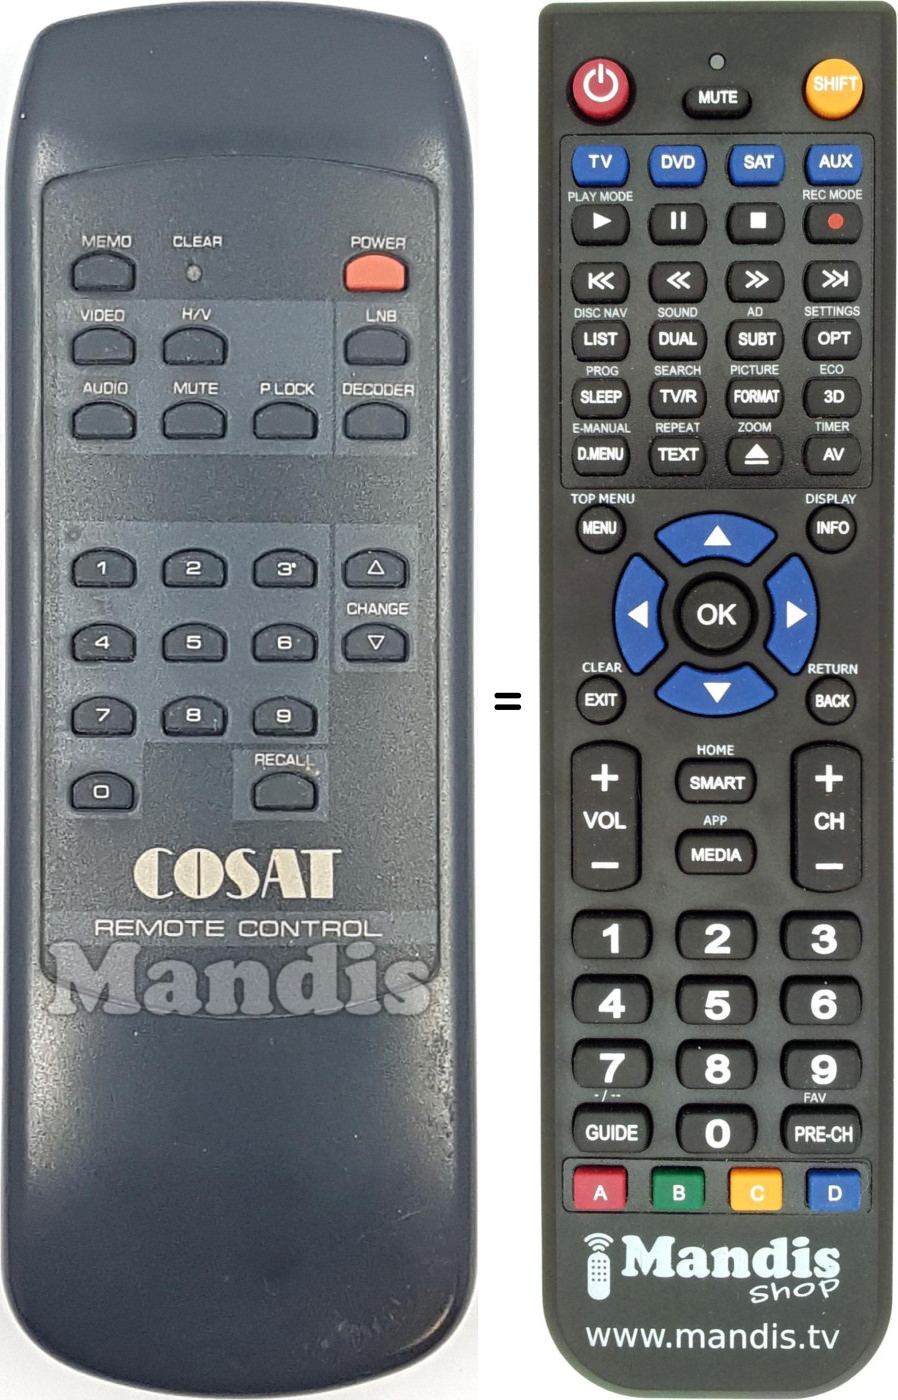 Replacement remote control COSAT001